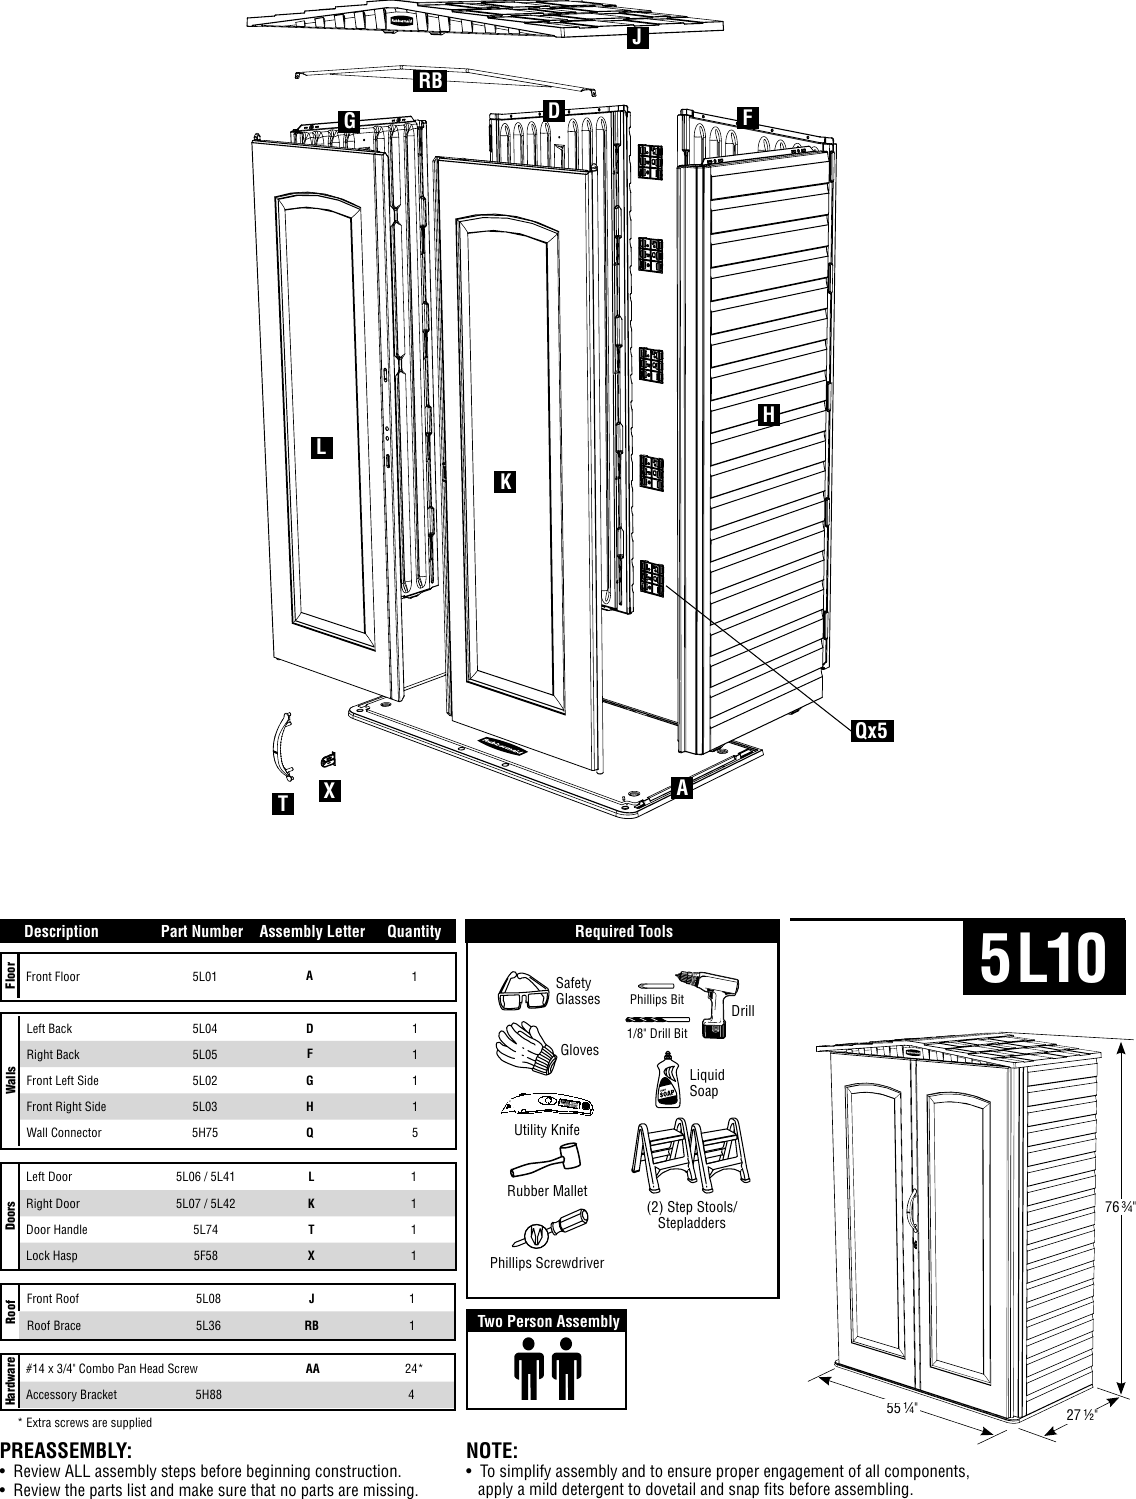 Page 2 of 12 - Rubbermaid Rubbermaid-Outdoor-Storage-5L10-Users-Manual- 5L10 Assembly Instructions English  Rubbermaid-outdoor-storage-5l10-users-manual